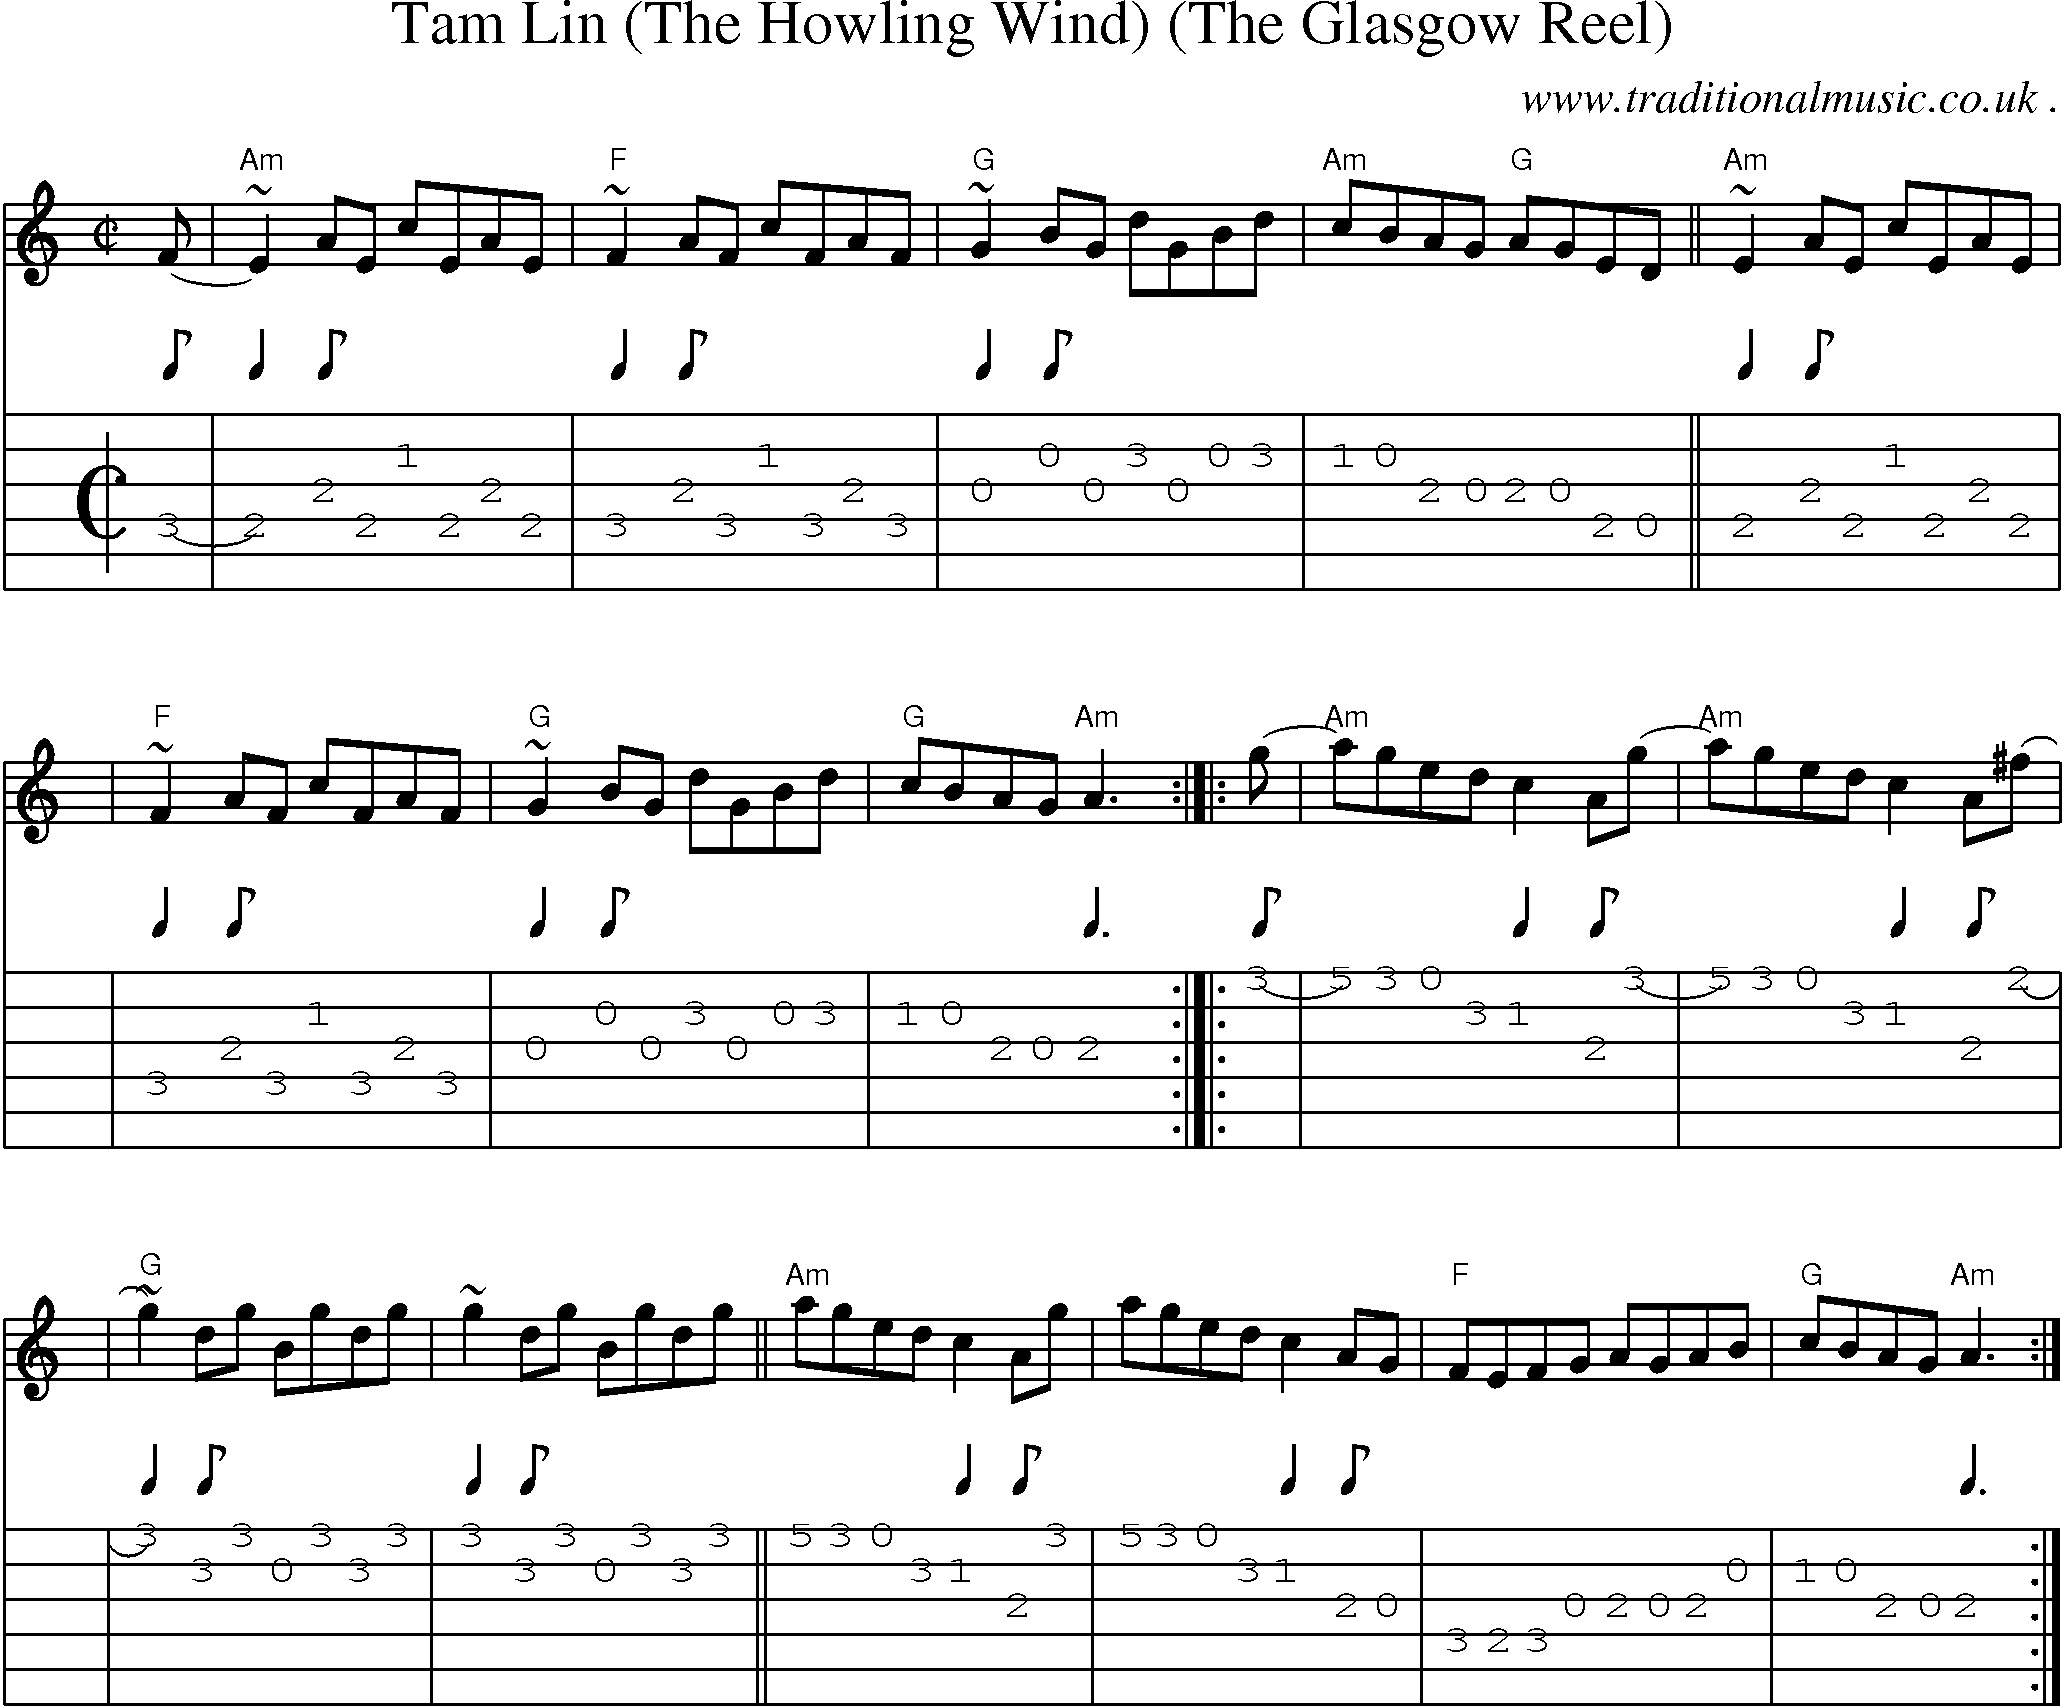 Sheet-music  score, Chords and Guitar Tabs for Tam Lin The Howling Wind The Glasgow Reel